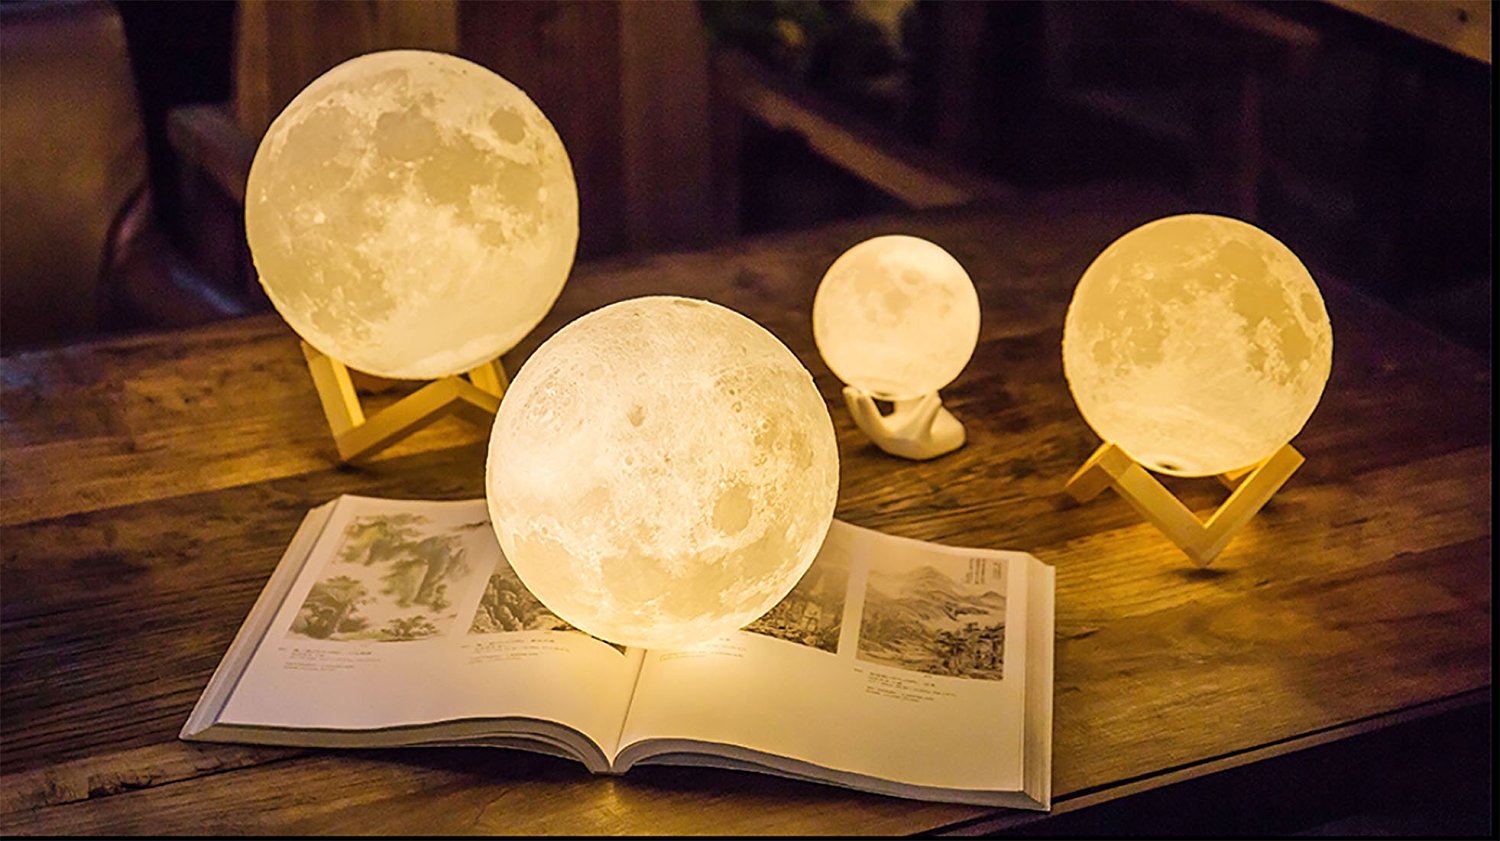 10 Cm 3d Print Led Lamp Moon Night Light Adult Valentine S Day Kids Gifts Touch 3d Moon Lamp Nightlight Moon Light Lamp Led Night Lights Aliexpress